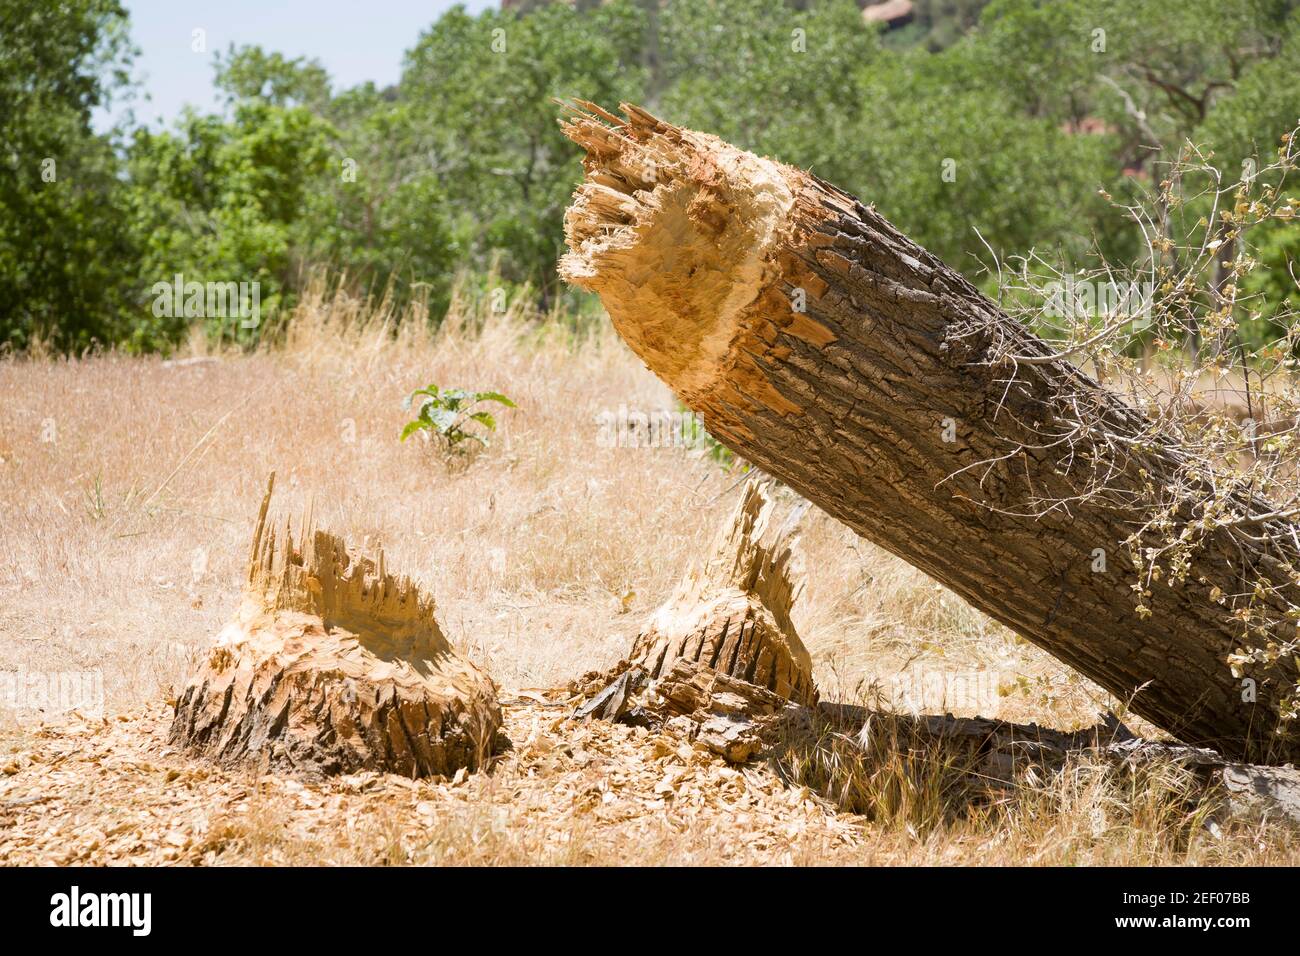 Beaver tree damage. Tree cut down by a North American beaver in Zion National Park, Utah, USA Stock Photo